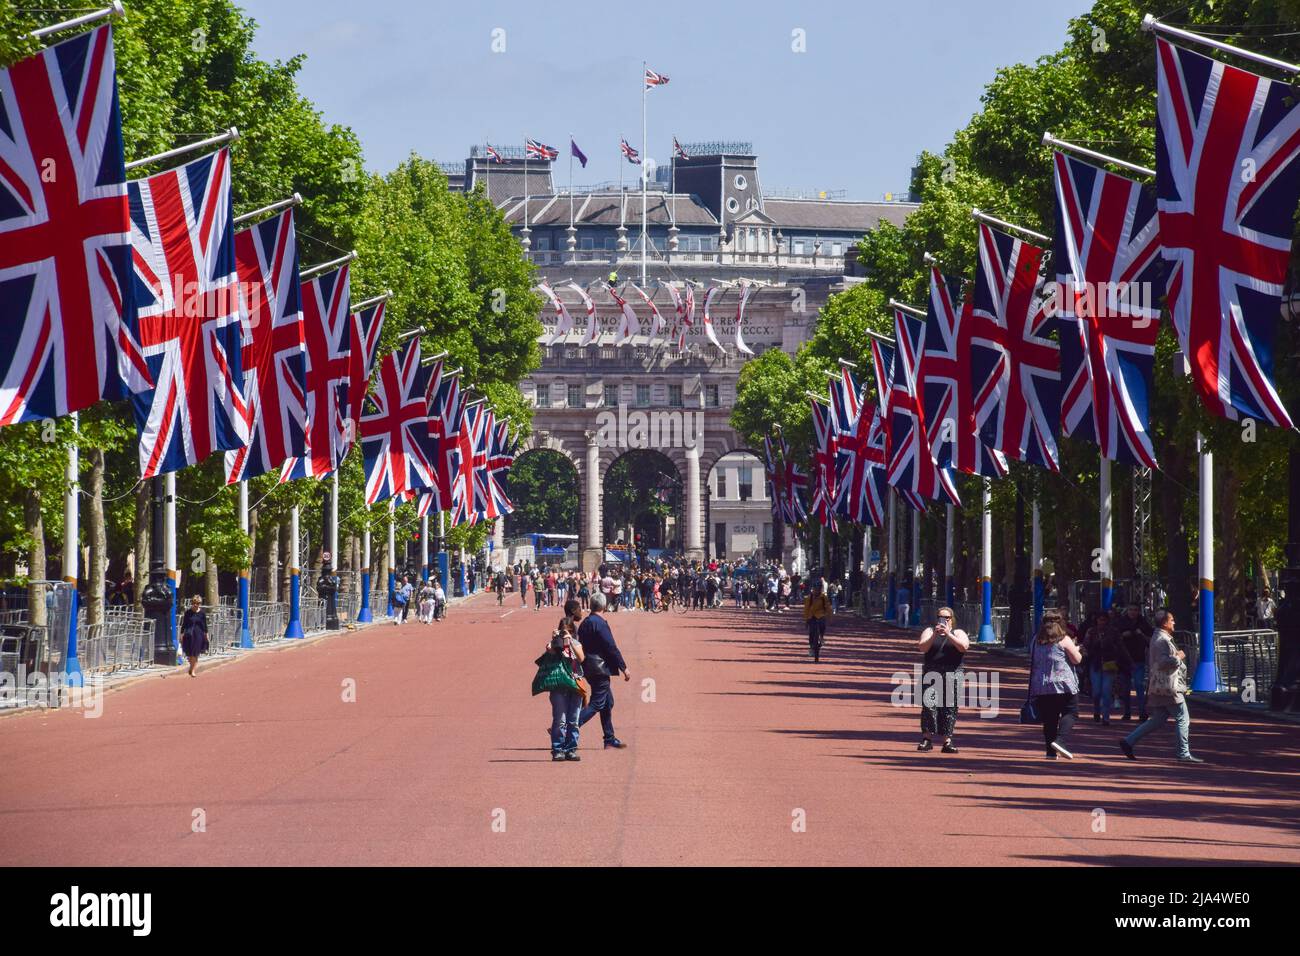 London, UK. 27th May 2022.  Union Jack flags decorate The Mall for the Queen's Platinum Jubilee, marking the 70th anniversary of the Queen's accession to the throne. A special extended Platinum Jubilee Weekend will take place 2nd-5th June. Credit: Vuk Valcic/Alamy Live News Stock Photo